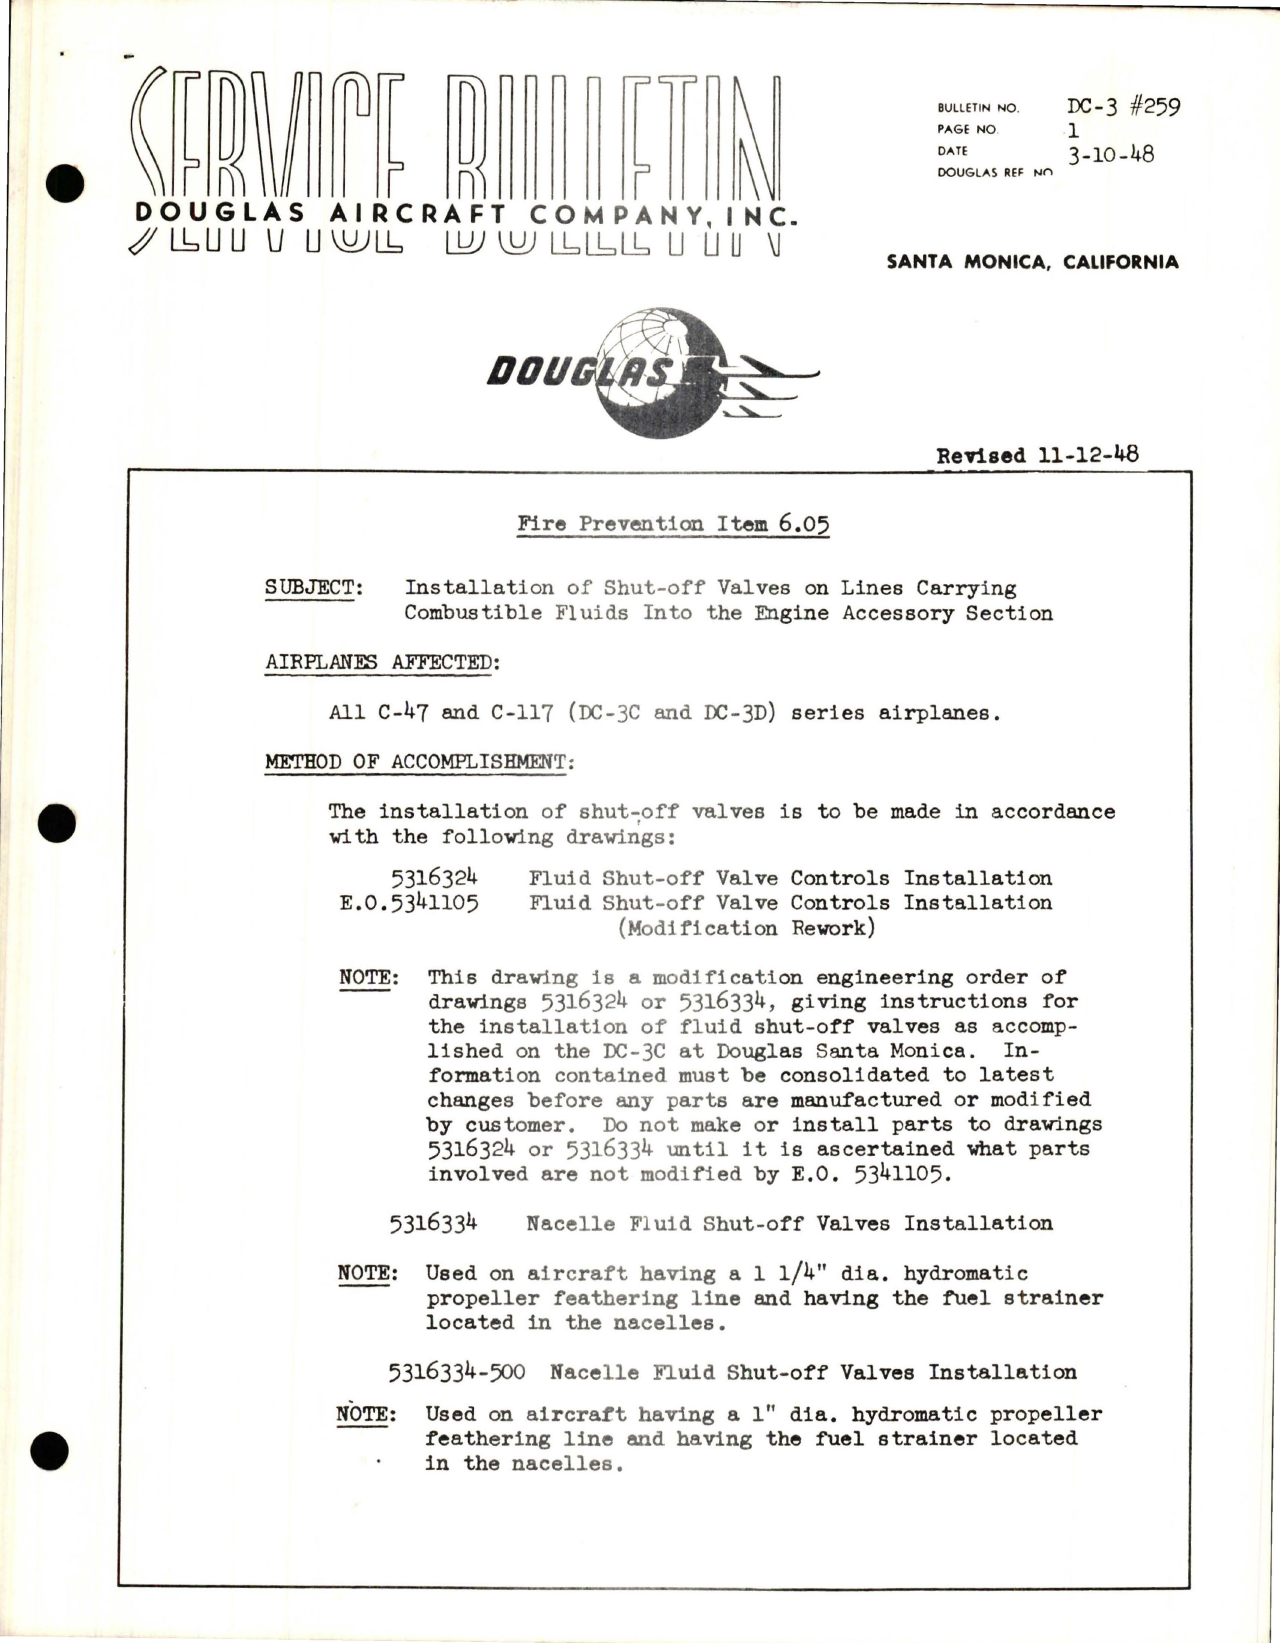 Sample page 1 from AirCorps Library document: Installation of Shut-Off Valves on Lines Carrying Combustible Fluids into the Engine Assembly Section